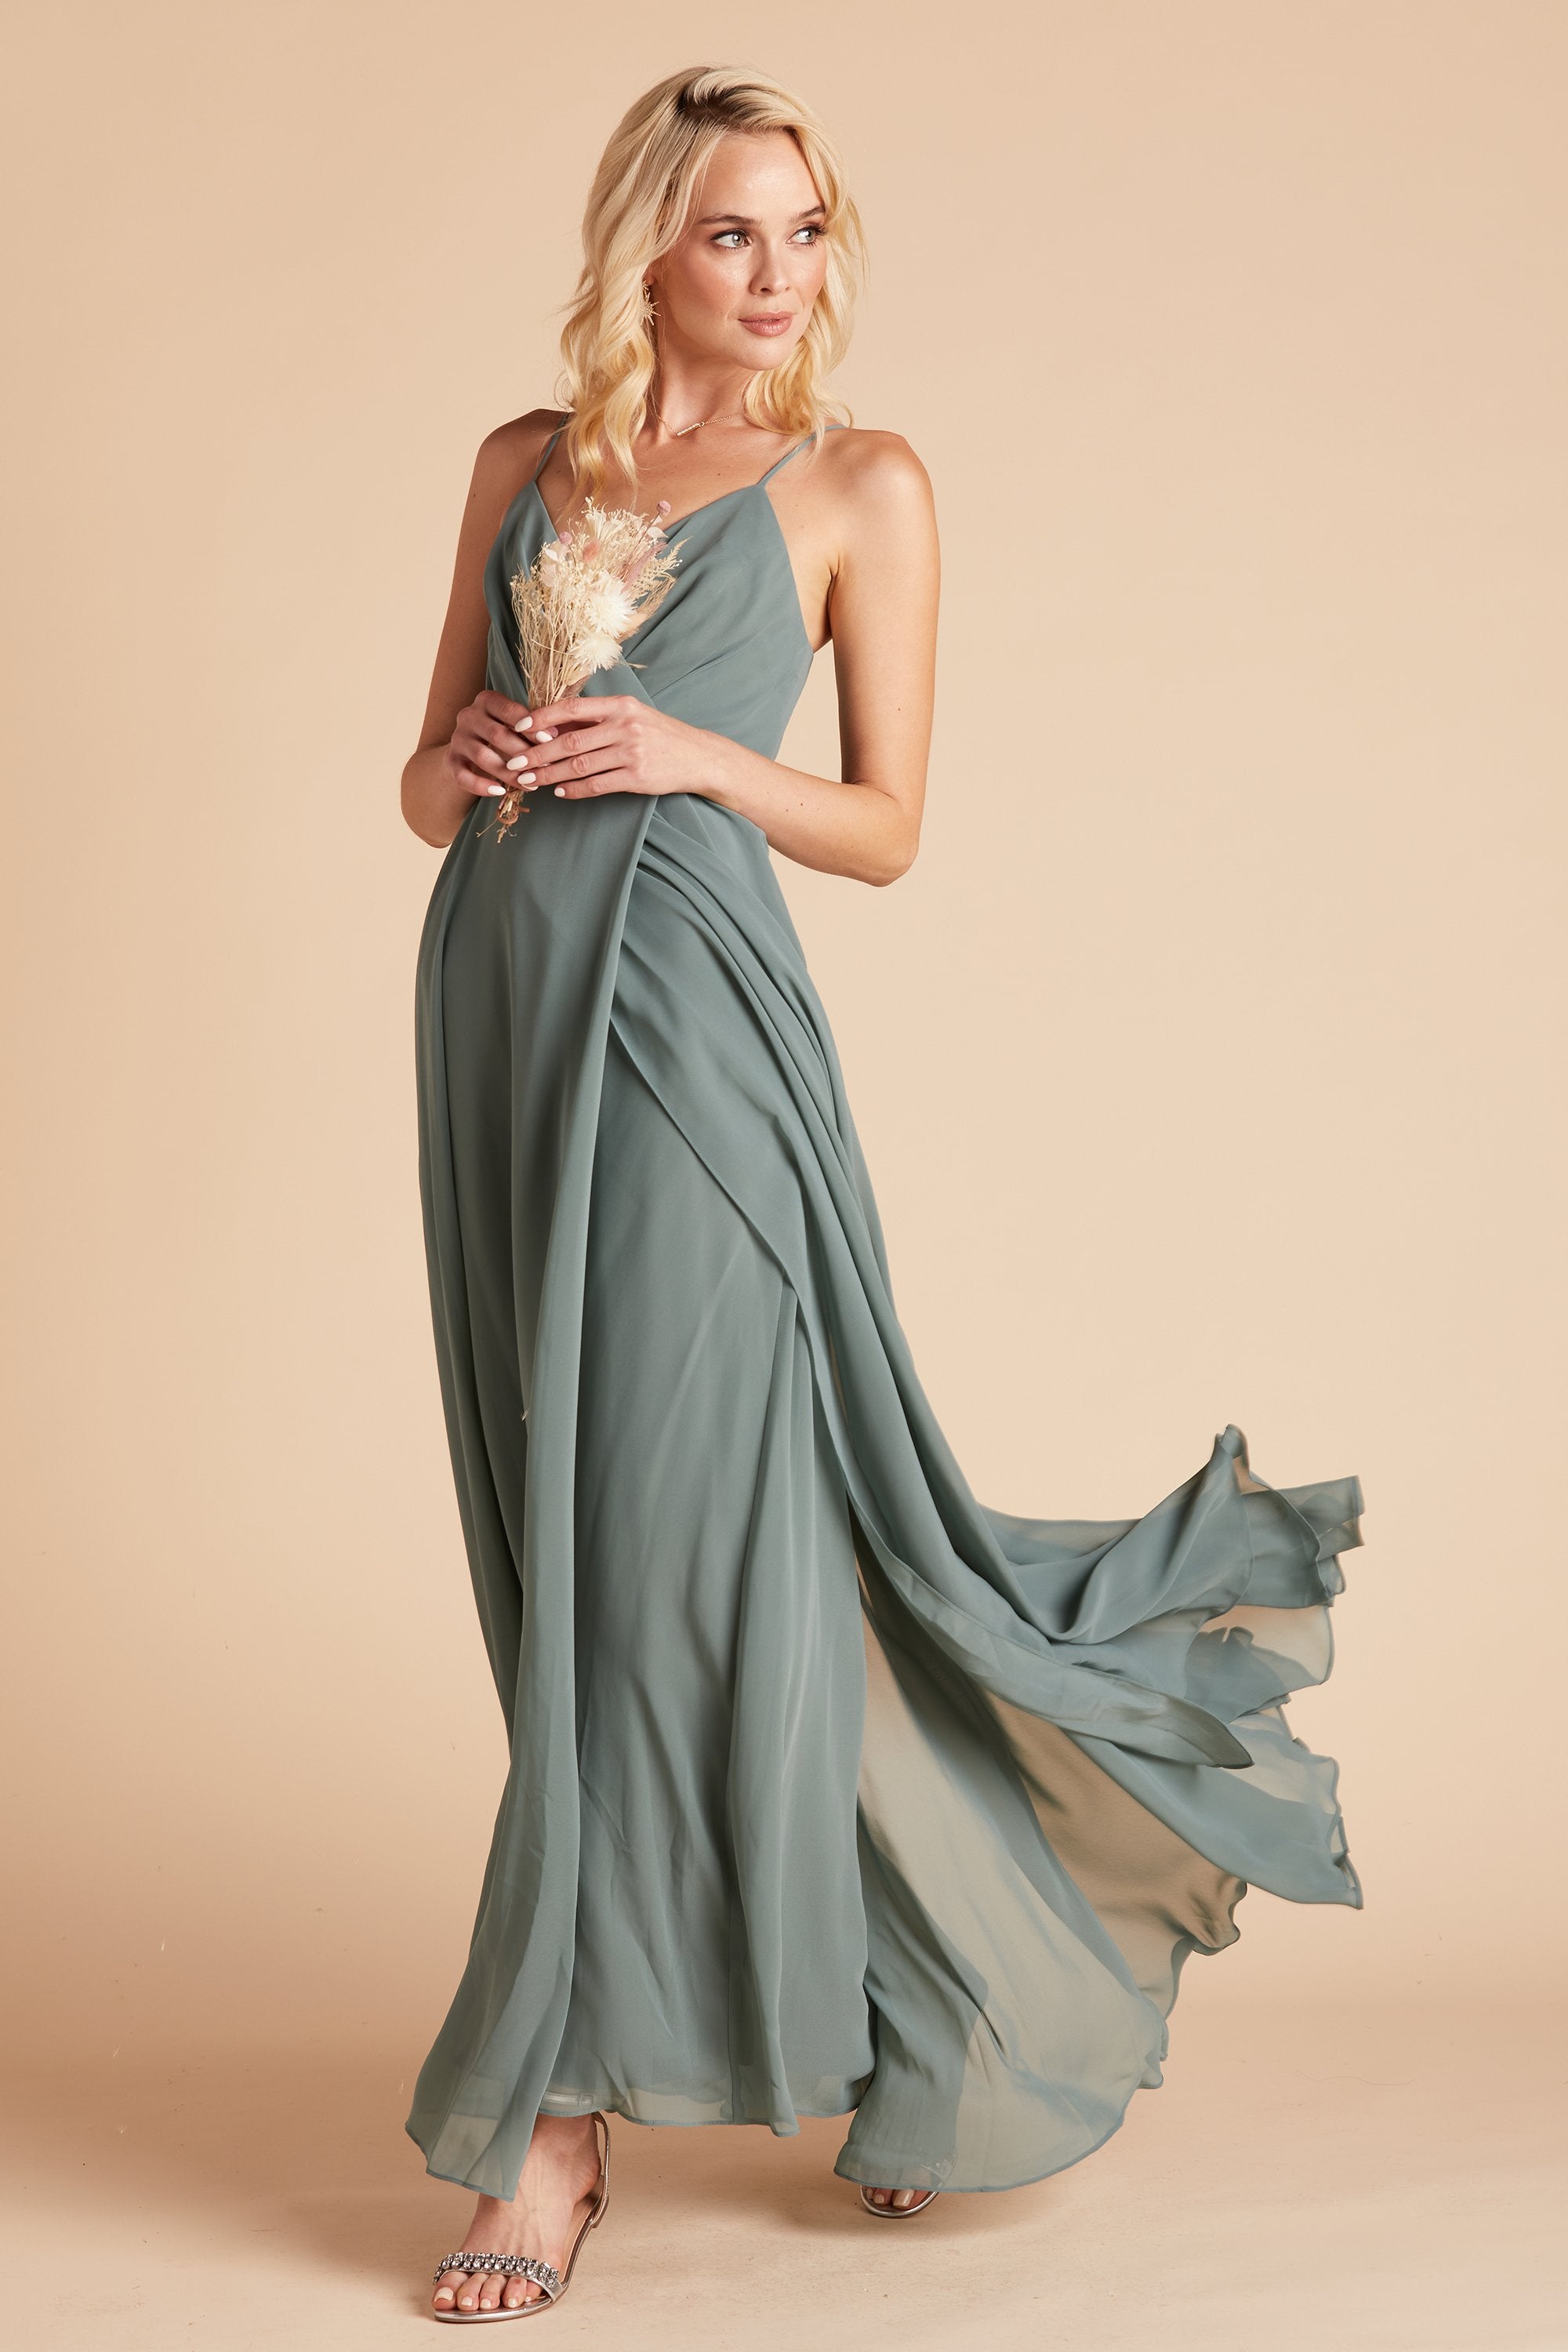 Front view of the Kaia Dress in sea glass chiffon shows a slender model with a light skin tone wearing a spaghetti strap V-neck dress that wraps across the chest to the raised empire waistline. The floor length overlapping skirt flows back behind the walking model.